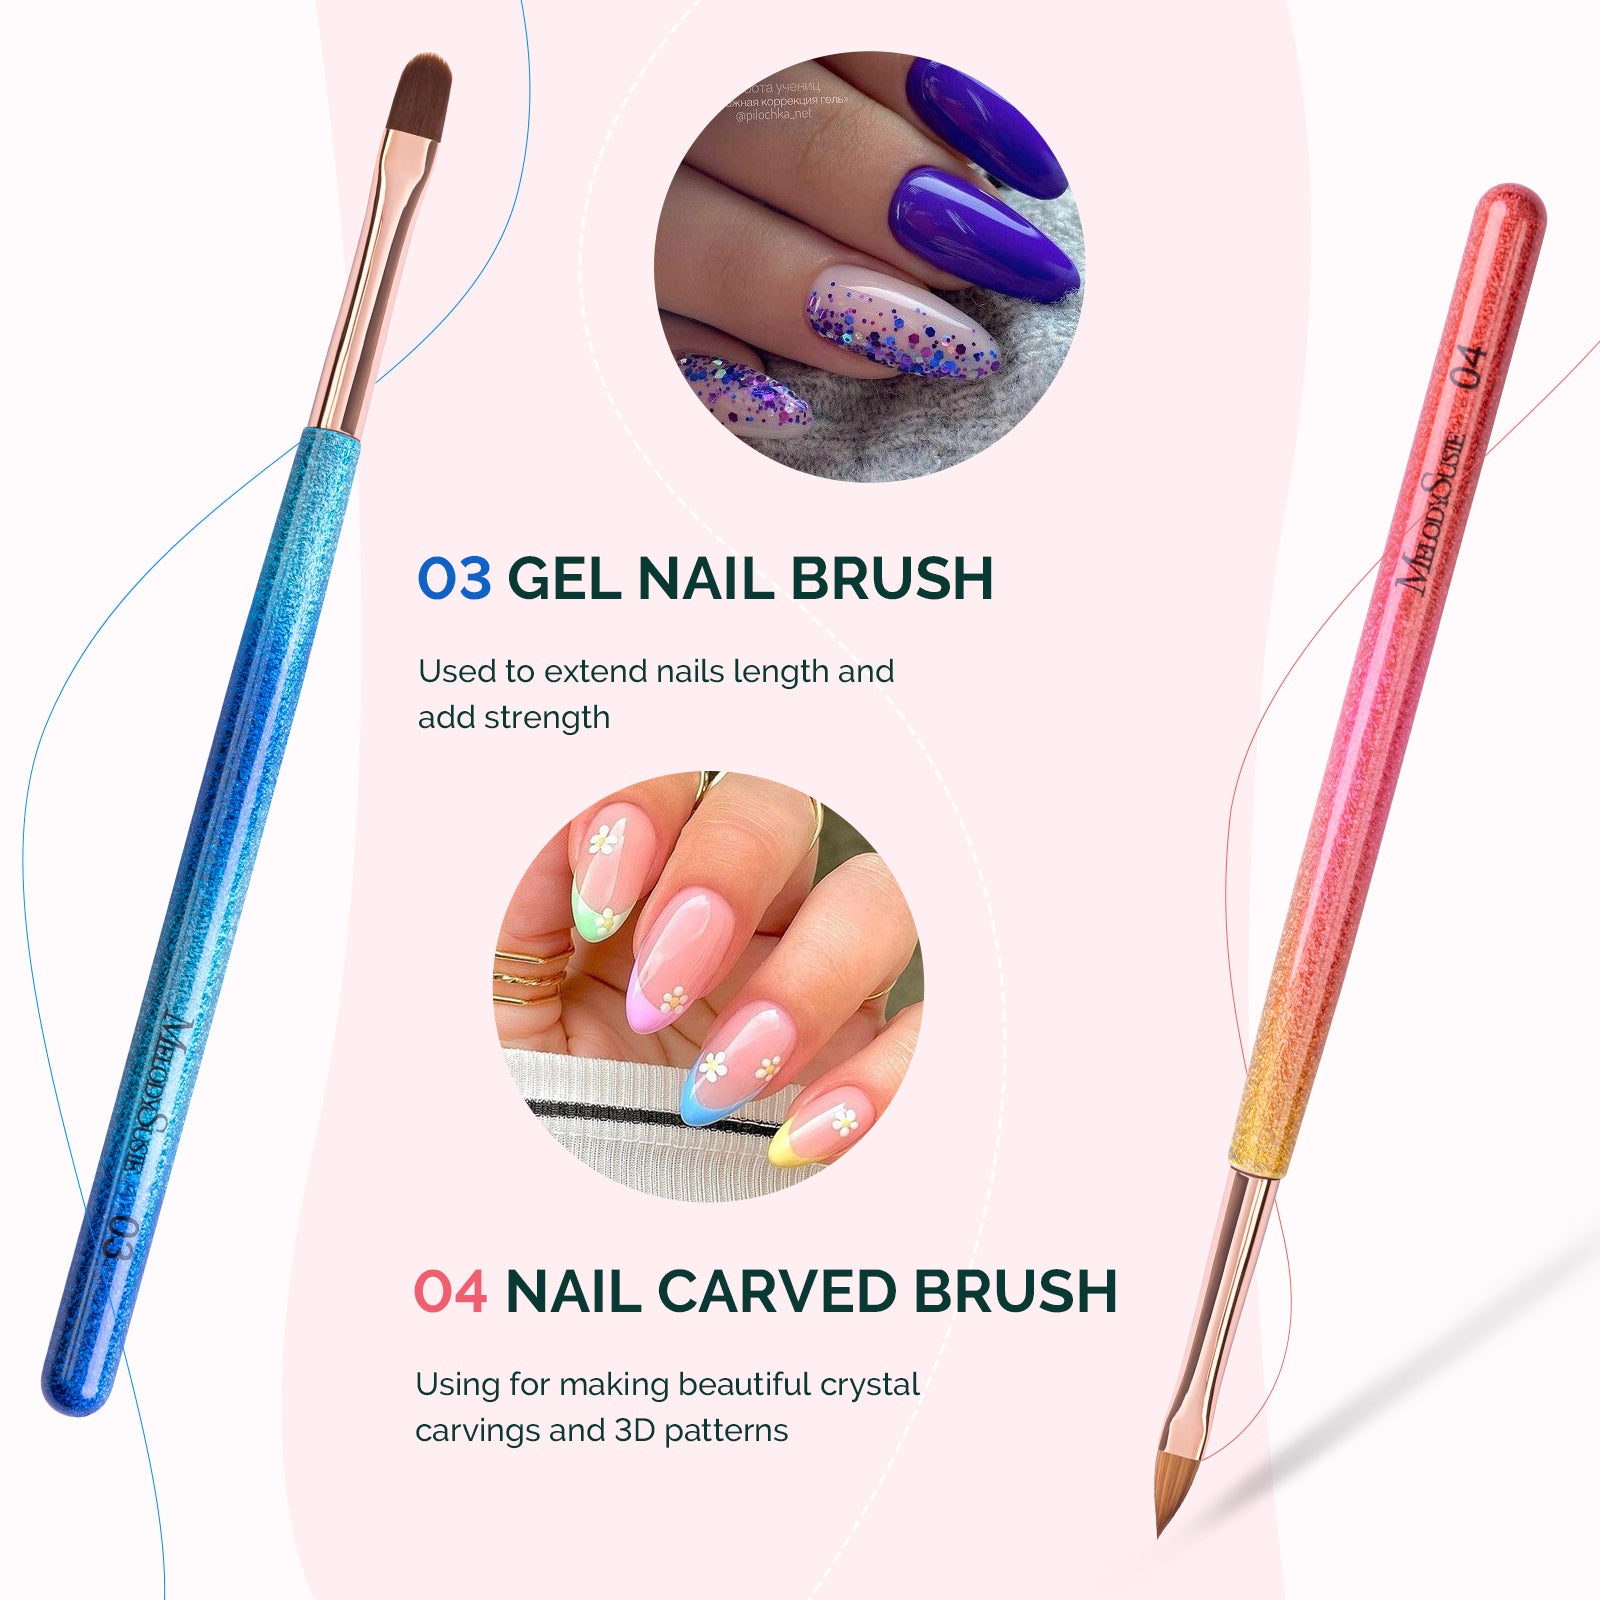 Nail Art Brushes - Dual-Ended Brush and Dotting Tool Set - Elegant Nail  Pencil Set with Shiny Handle - Easy-to-Use Professional Eyeliner Tool  5-Piece Nail Art Dual-Ended Dot Drawing Pen Nail Art